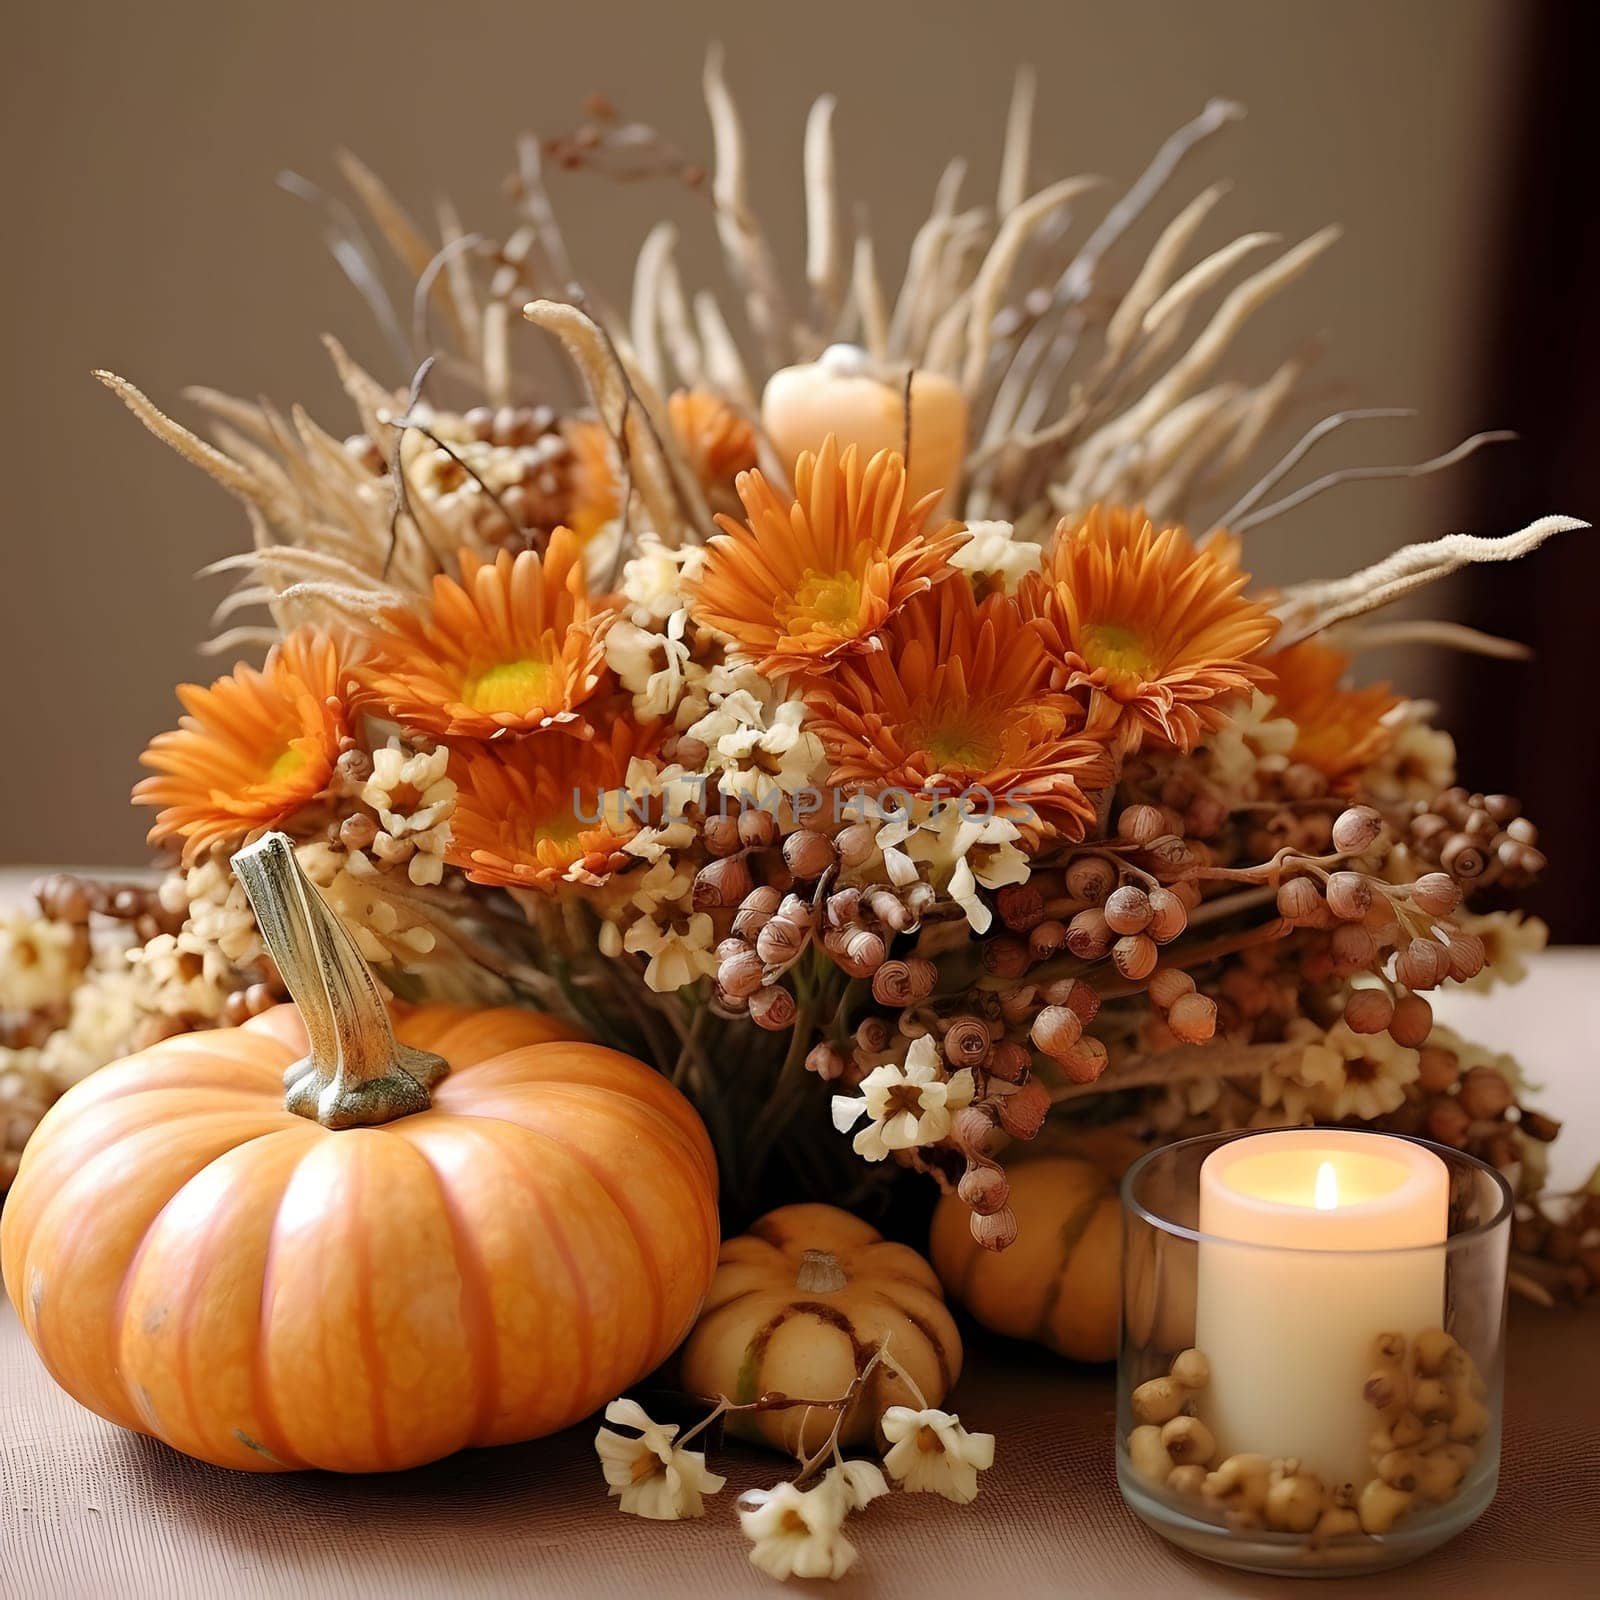 Elegantly arranged white candle pumpkins and autumn flowers. Pumpkin as a dish of thanksgiving for the harvest. An atmosphere of joy and celebration.